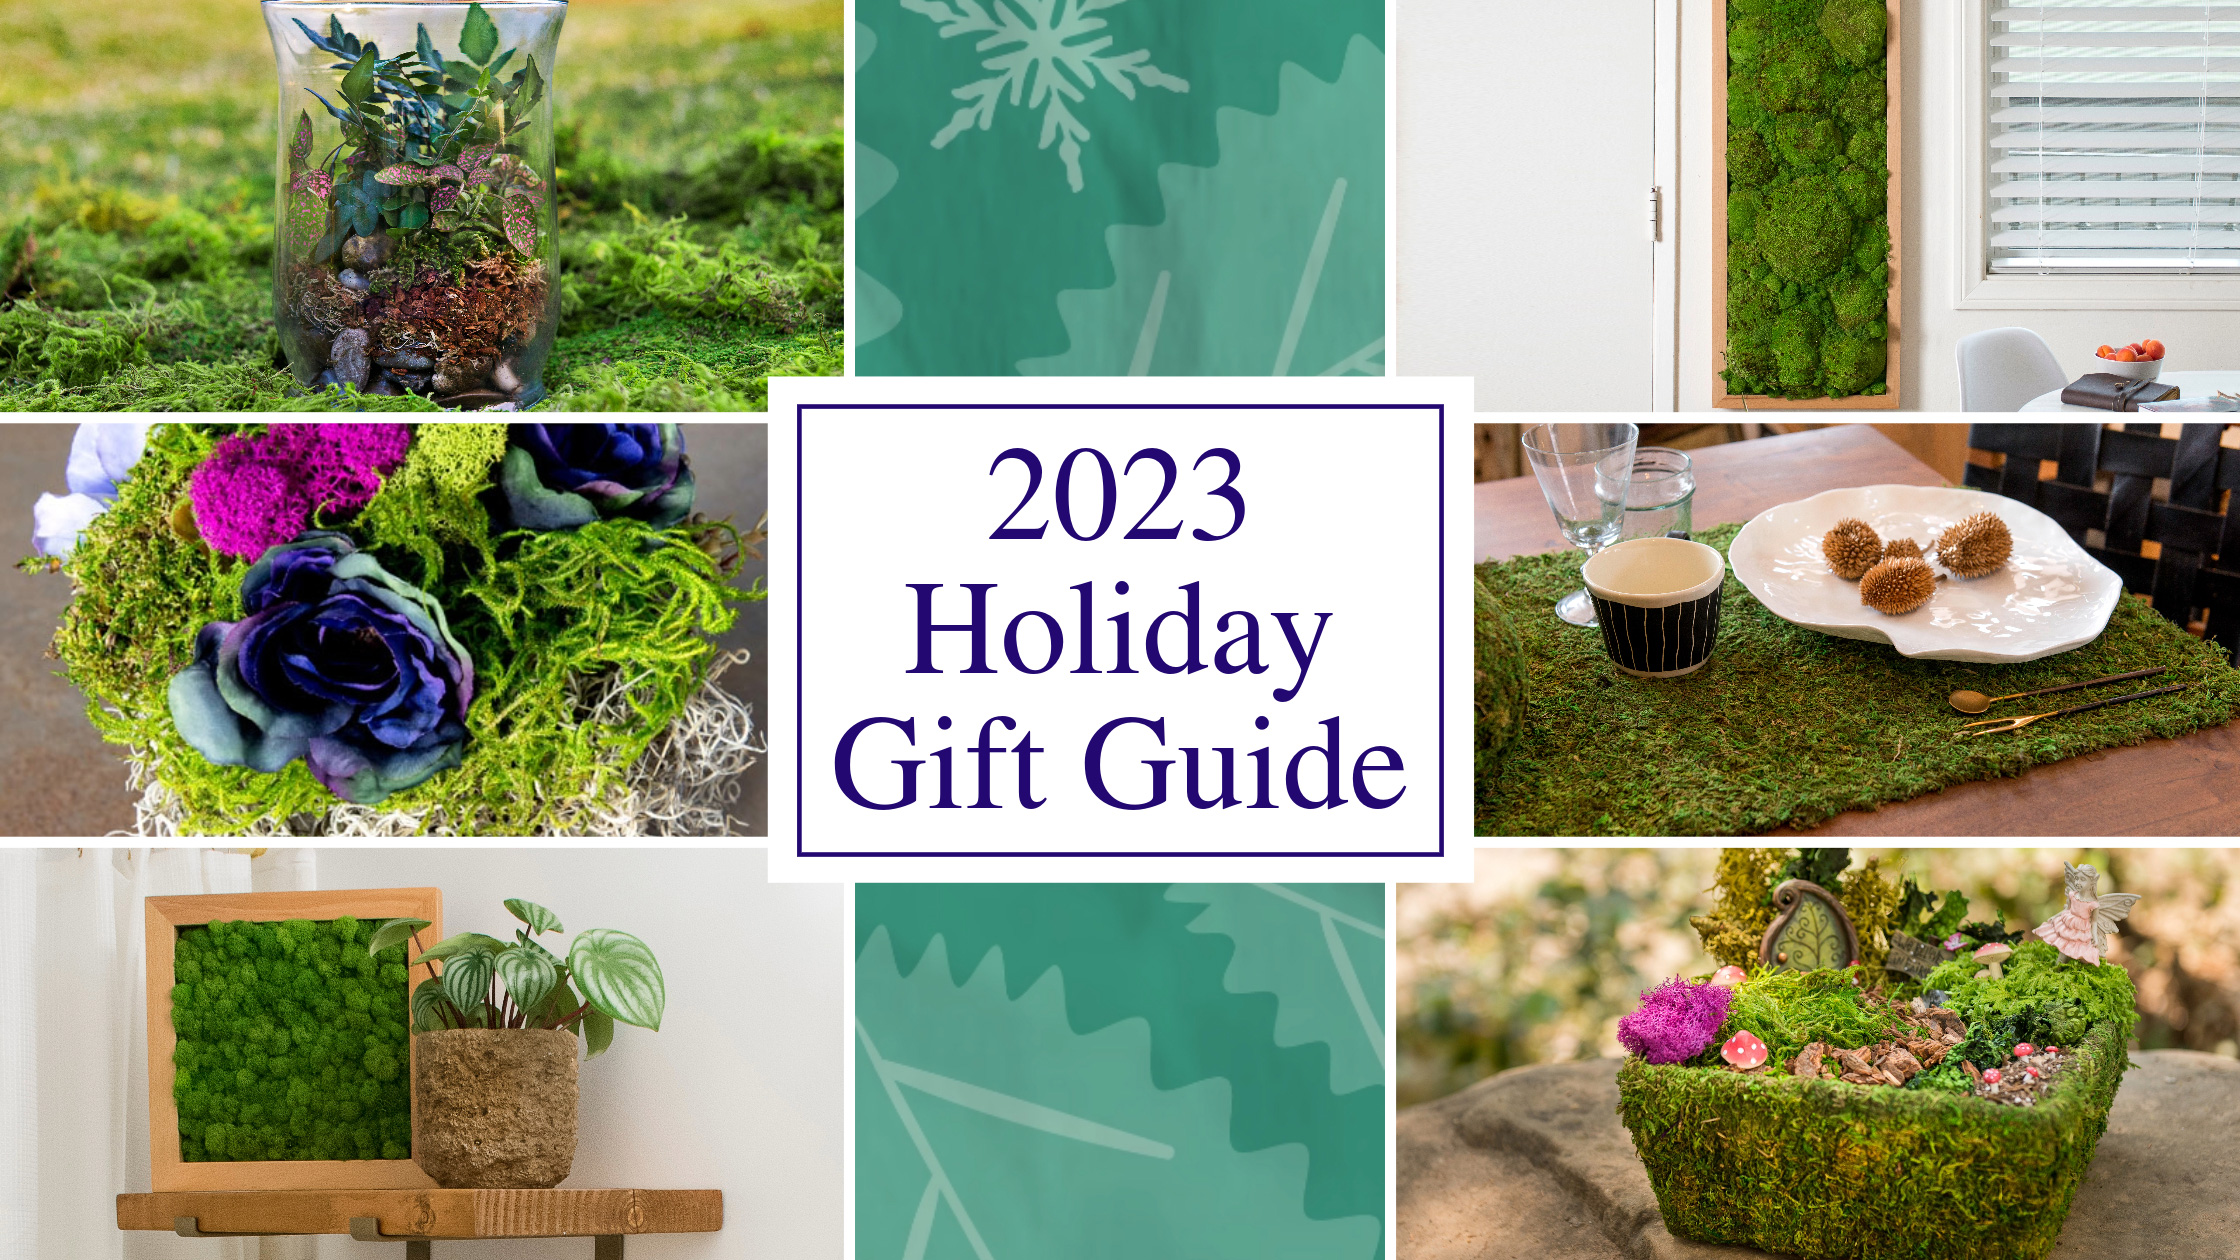 SuperMoss 2023 Holiday Gift Guide